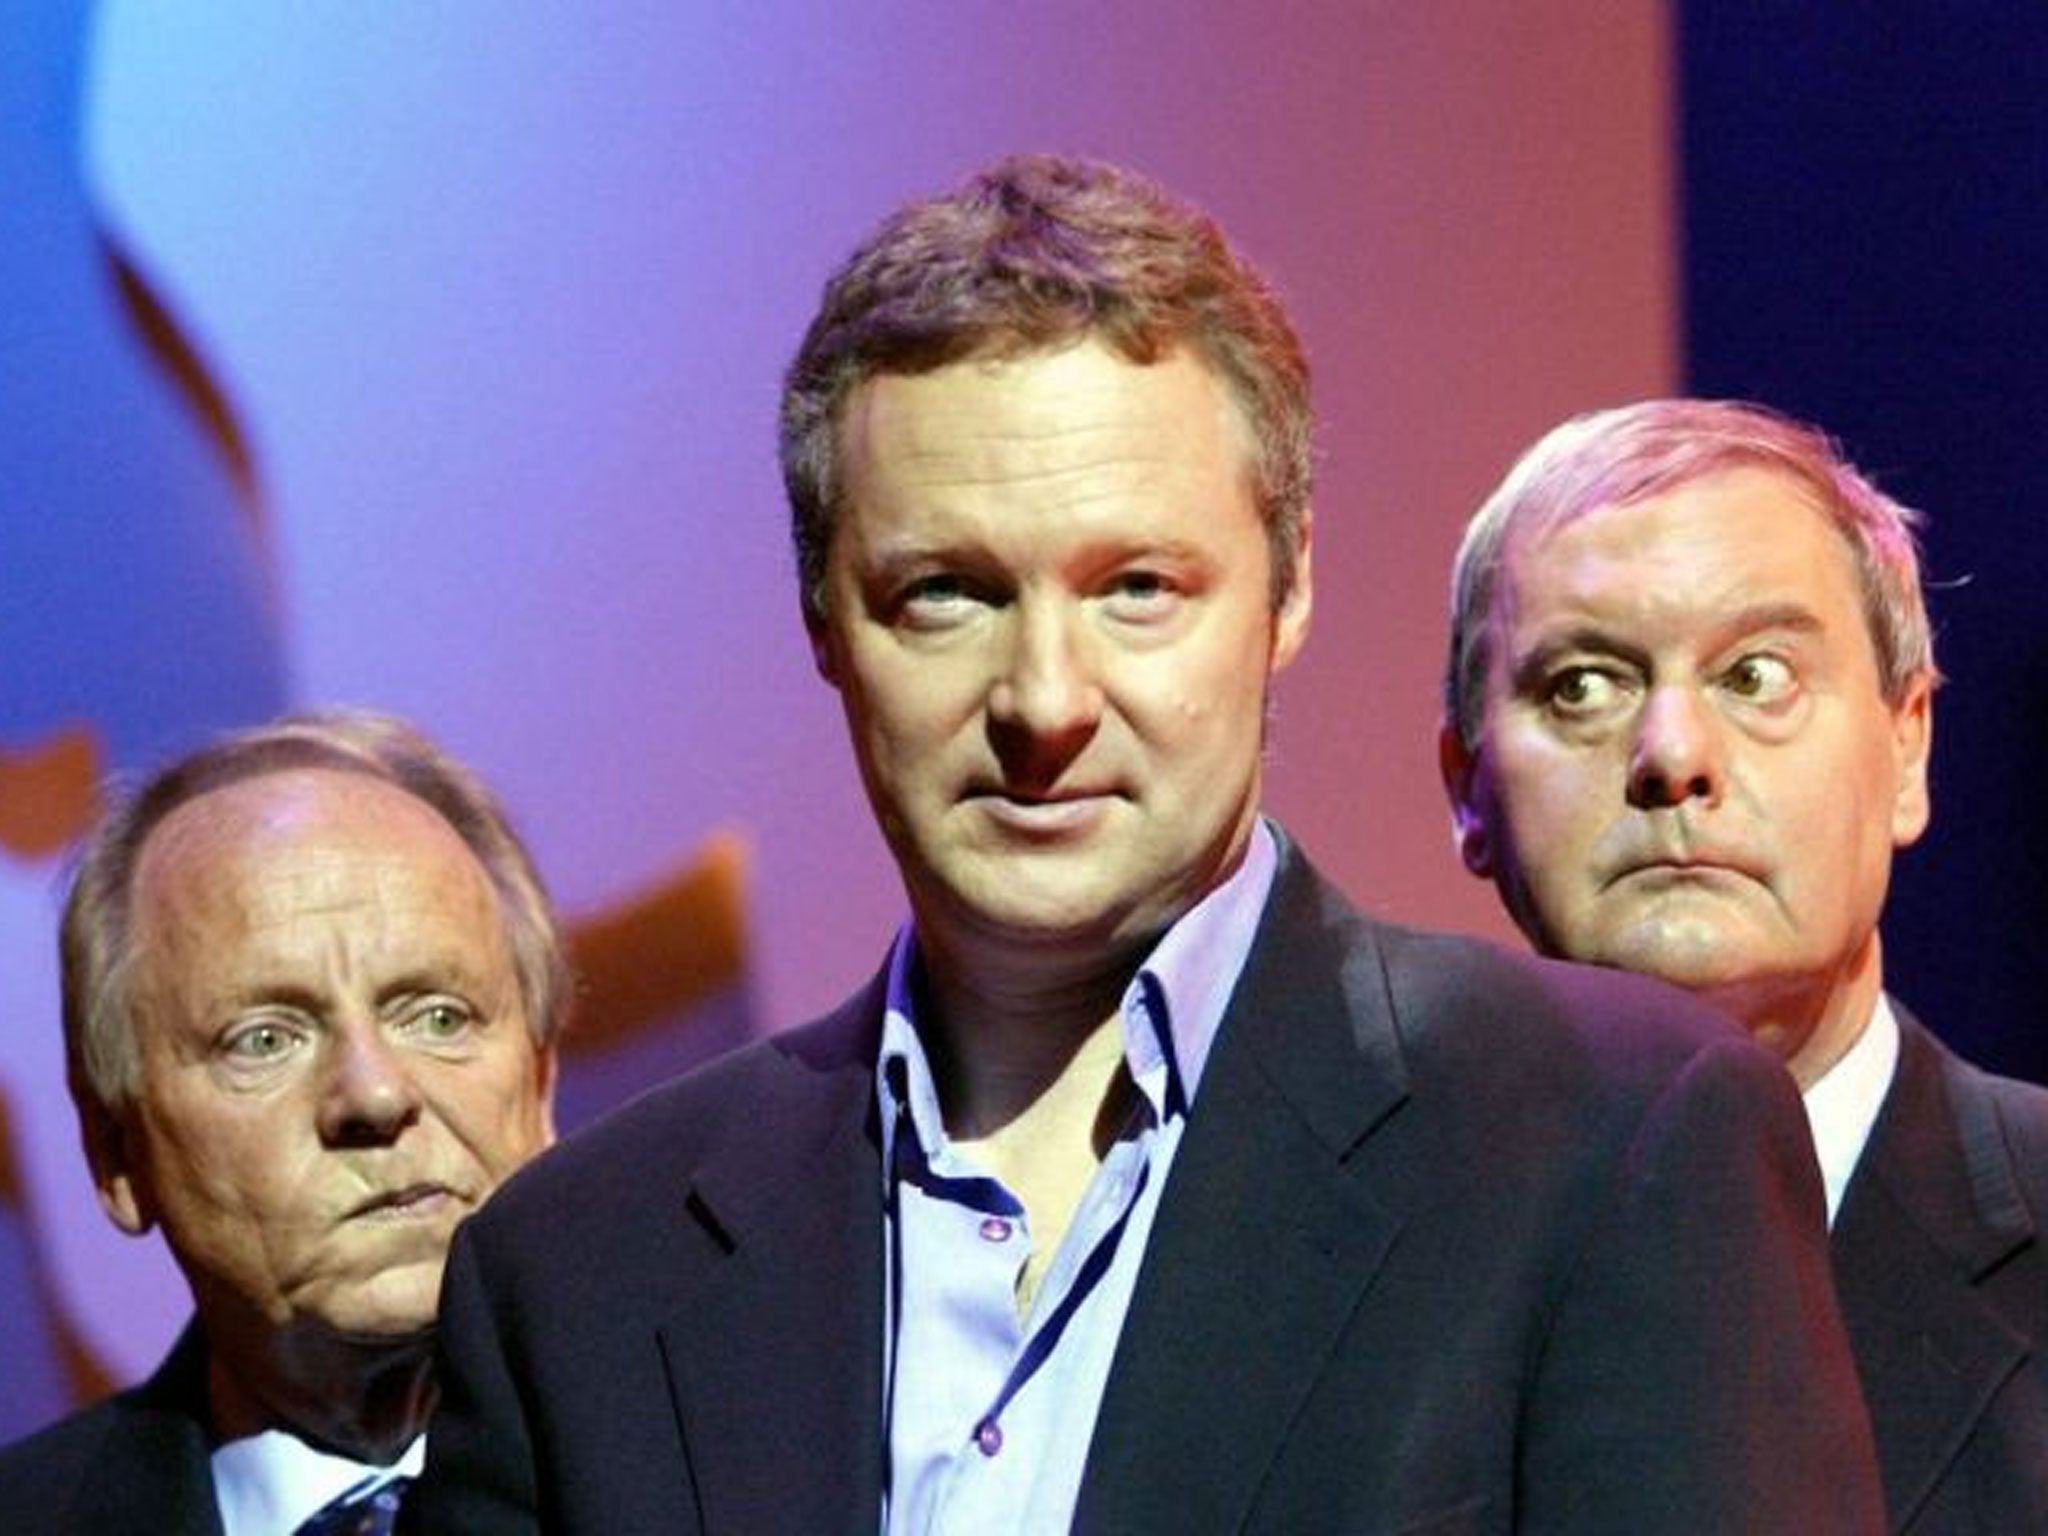 John Fortune (right) with long-time collaborators Rory Bremner and John Bird (left)